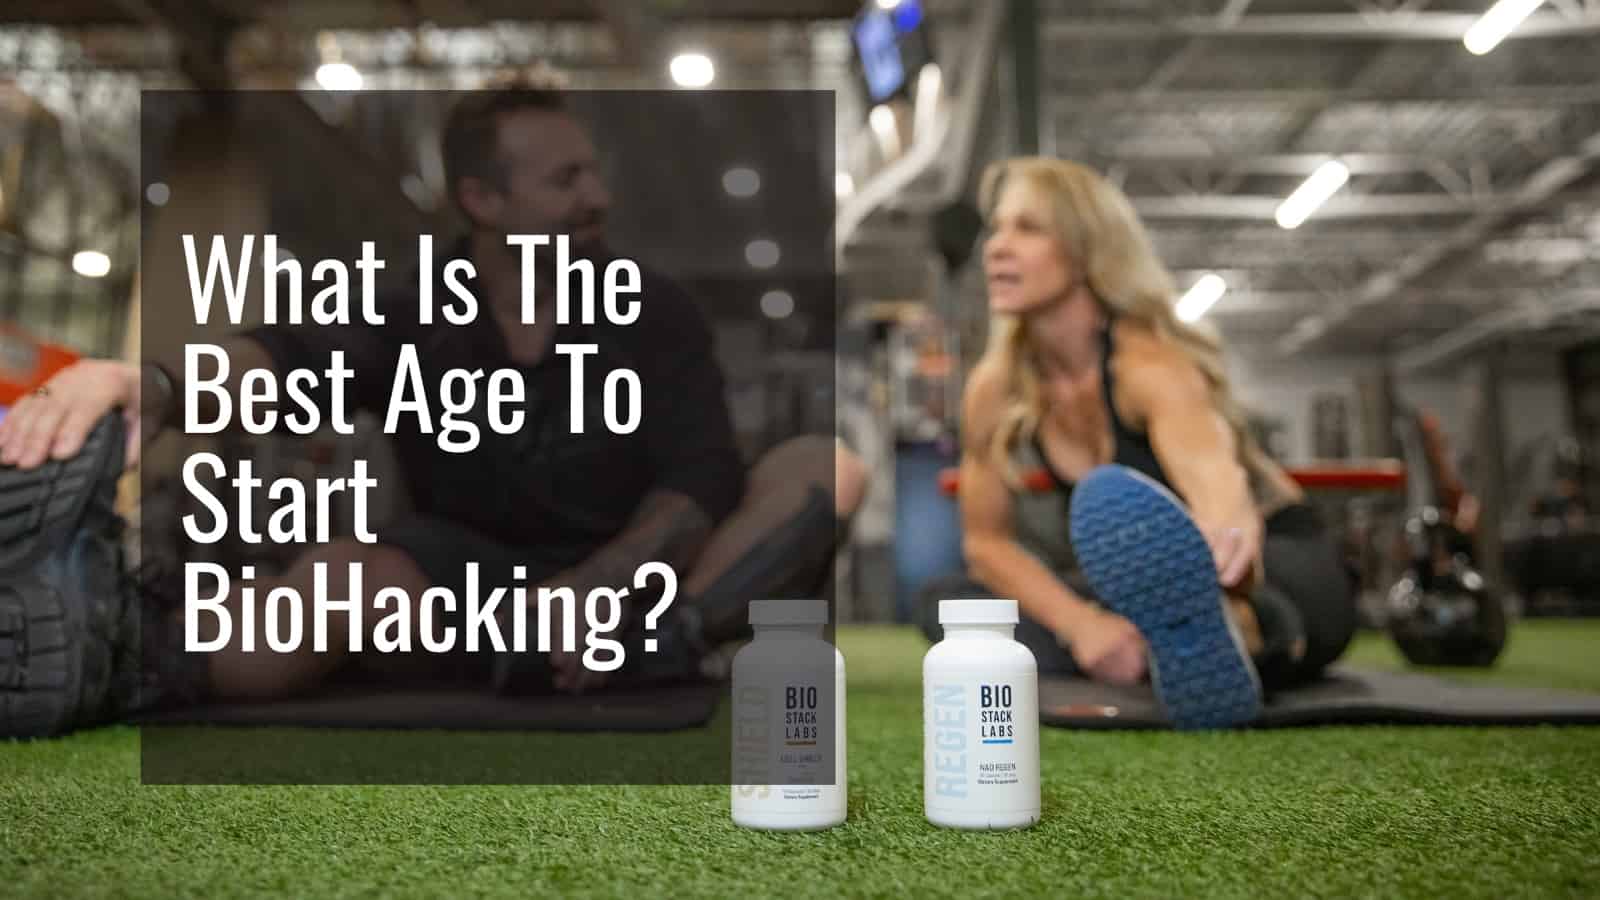 What Is The Best Age To Start BioHacking?